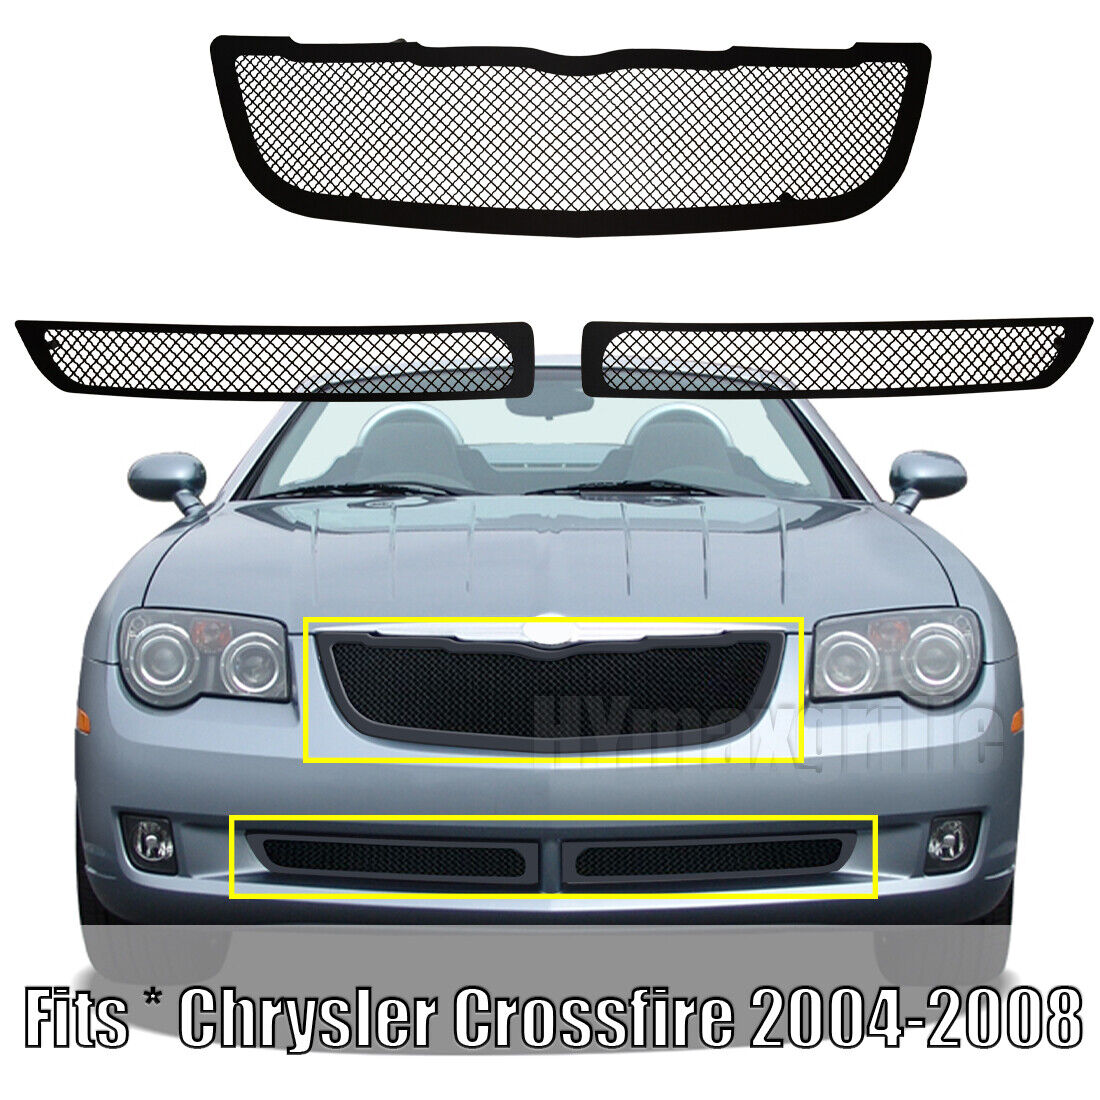 Black Mesh Grille Fits 2004-2008 Chrysler Crossfire Upper Lower Front GrilL